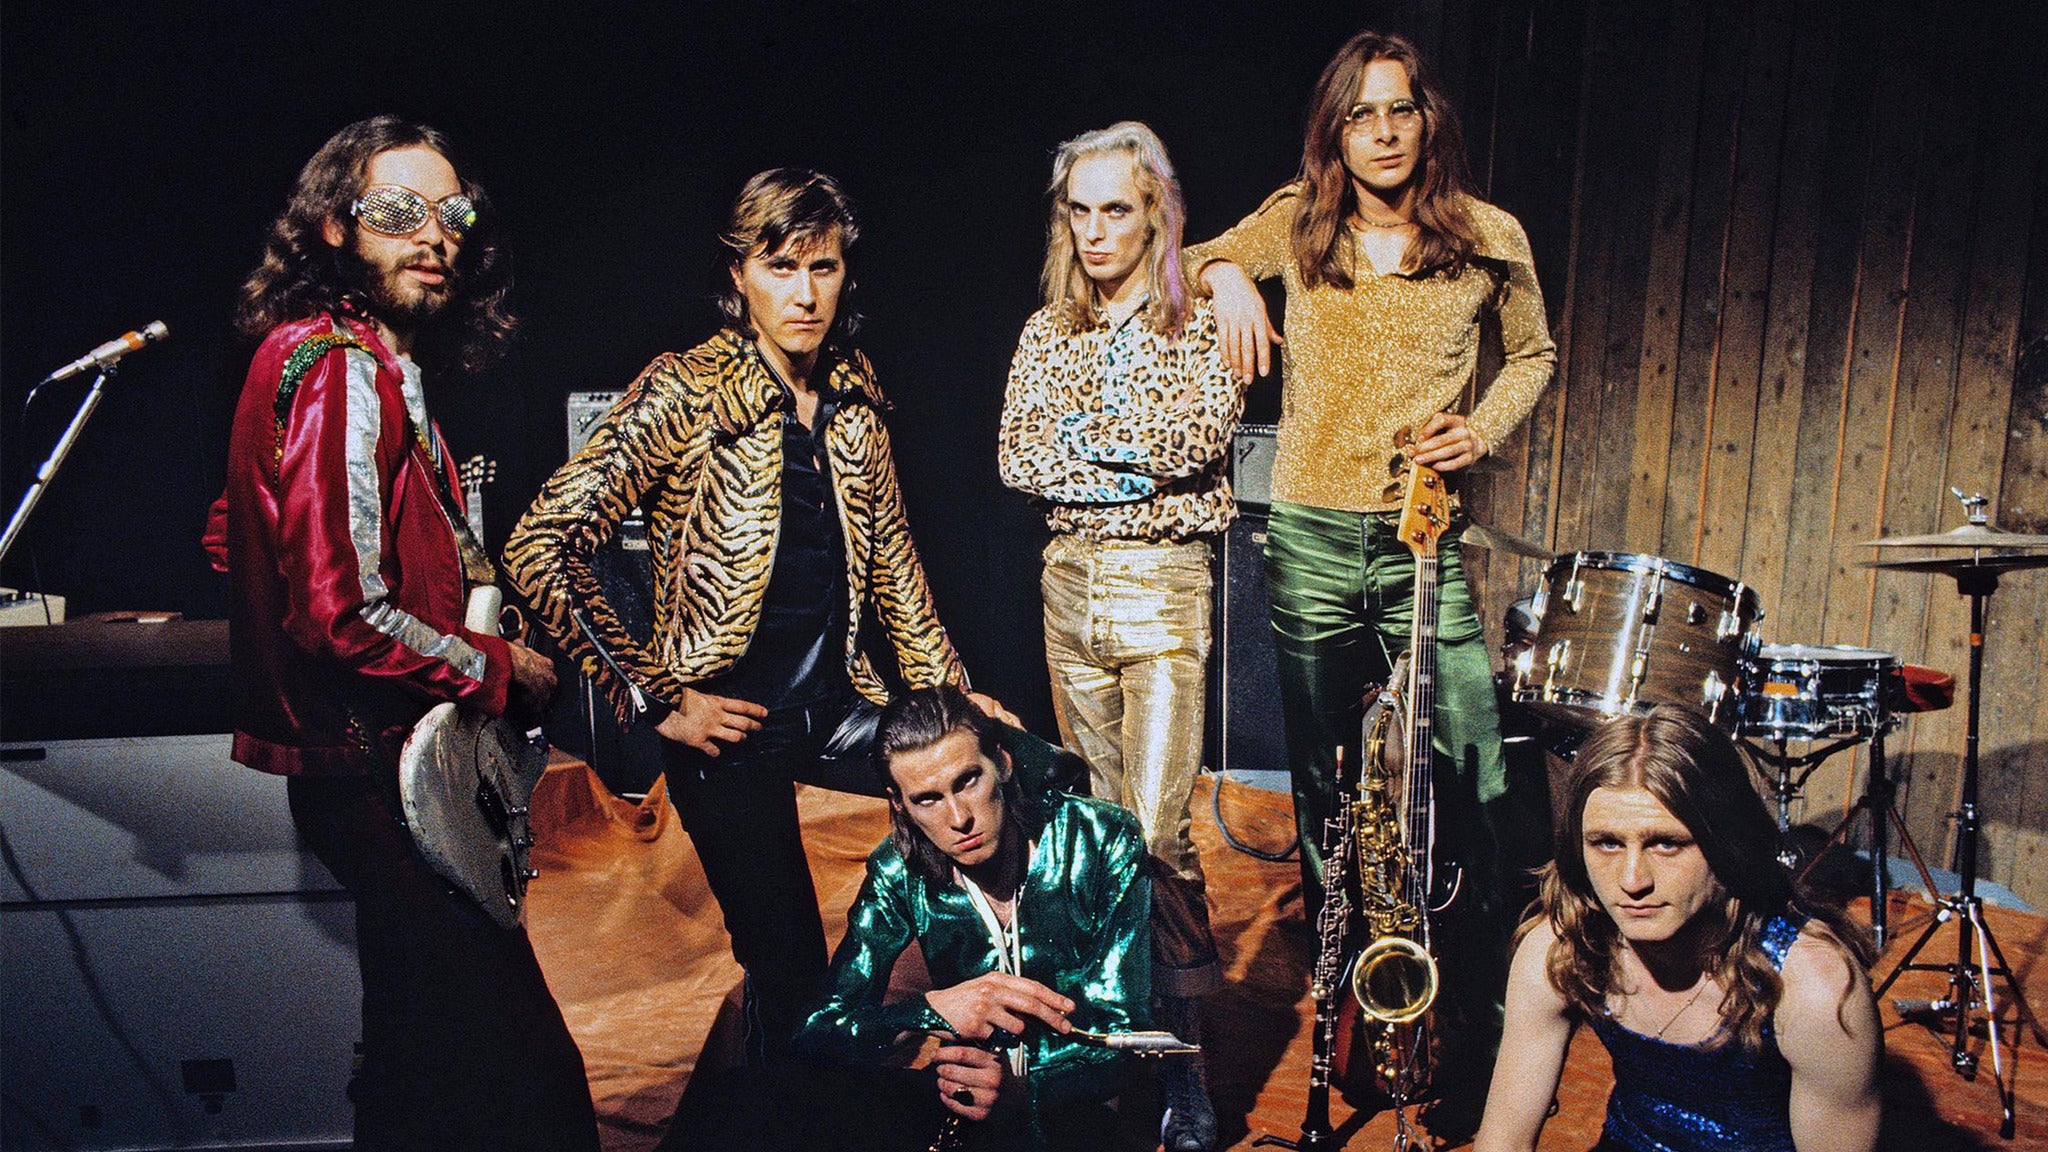 Roxy Music 50th Anniversary Tour in New York promo photo for VIP Package presale offer code